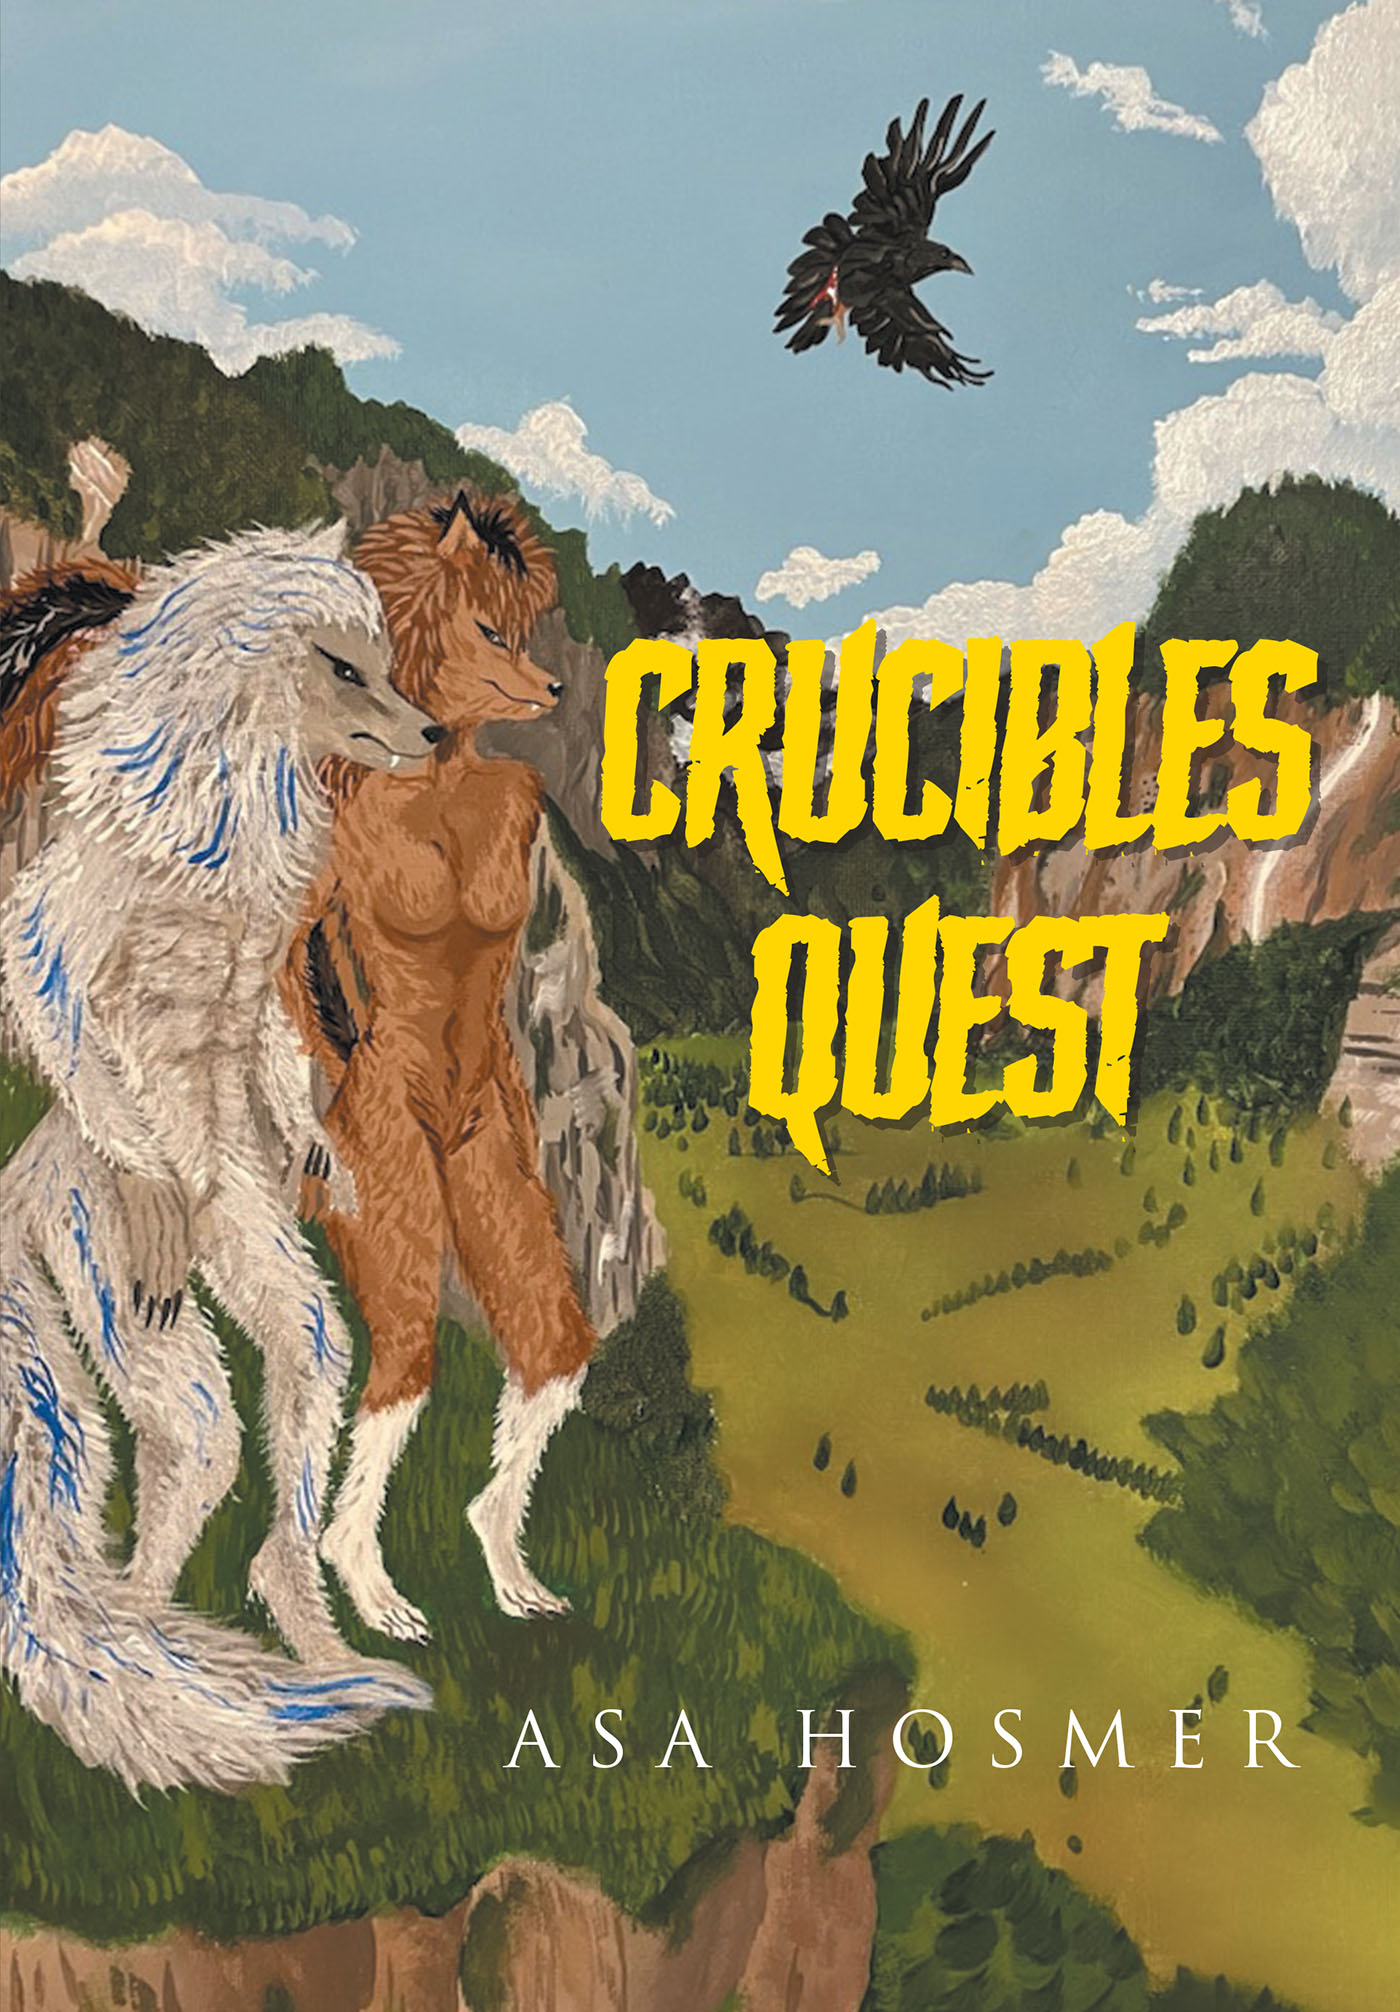 Author Asa Hosmer’s New Book, "Crucible’s Quest," is a Thrilling Supernatural Tale That Follows Two Werewolves Who Lose Their Way in Middle Earth